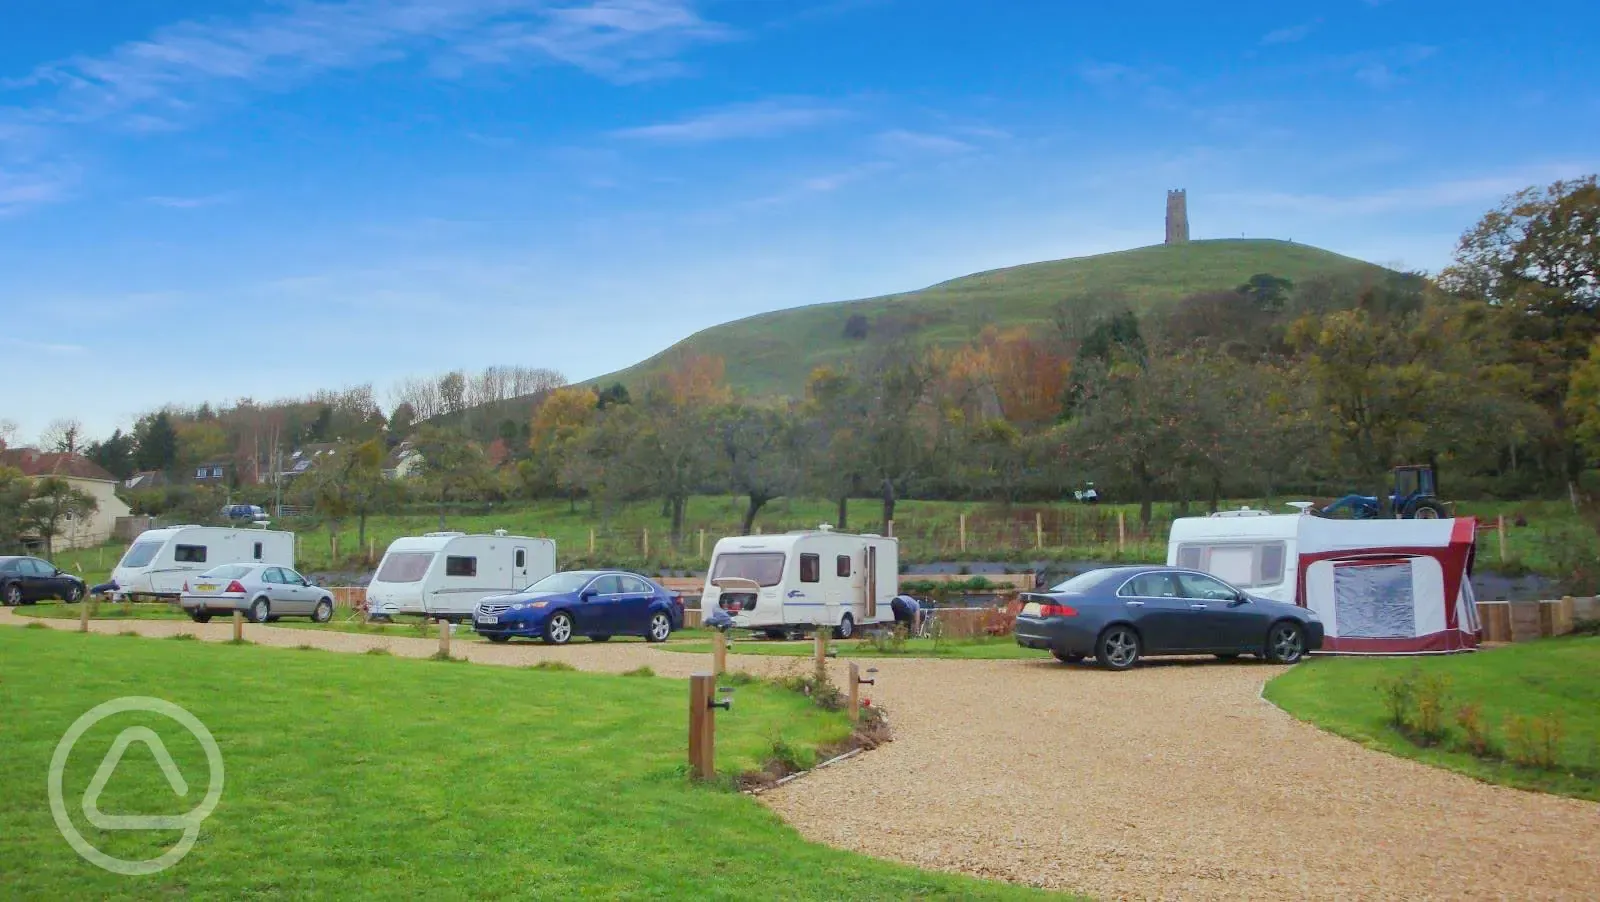 Electric hardstanding pitches with views of the Glastonbury Tor